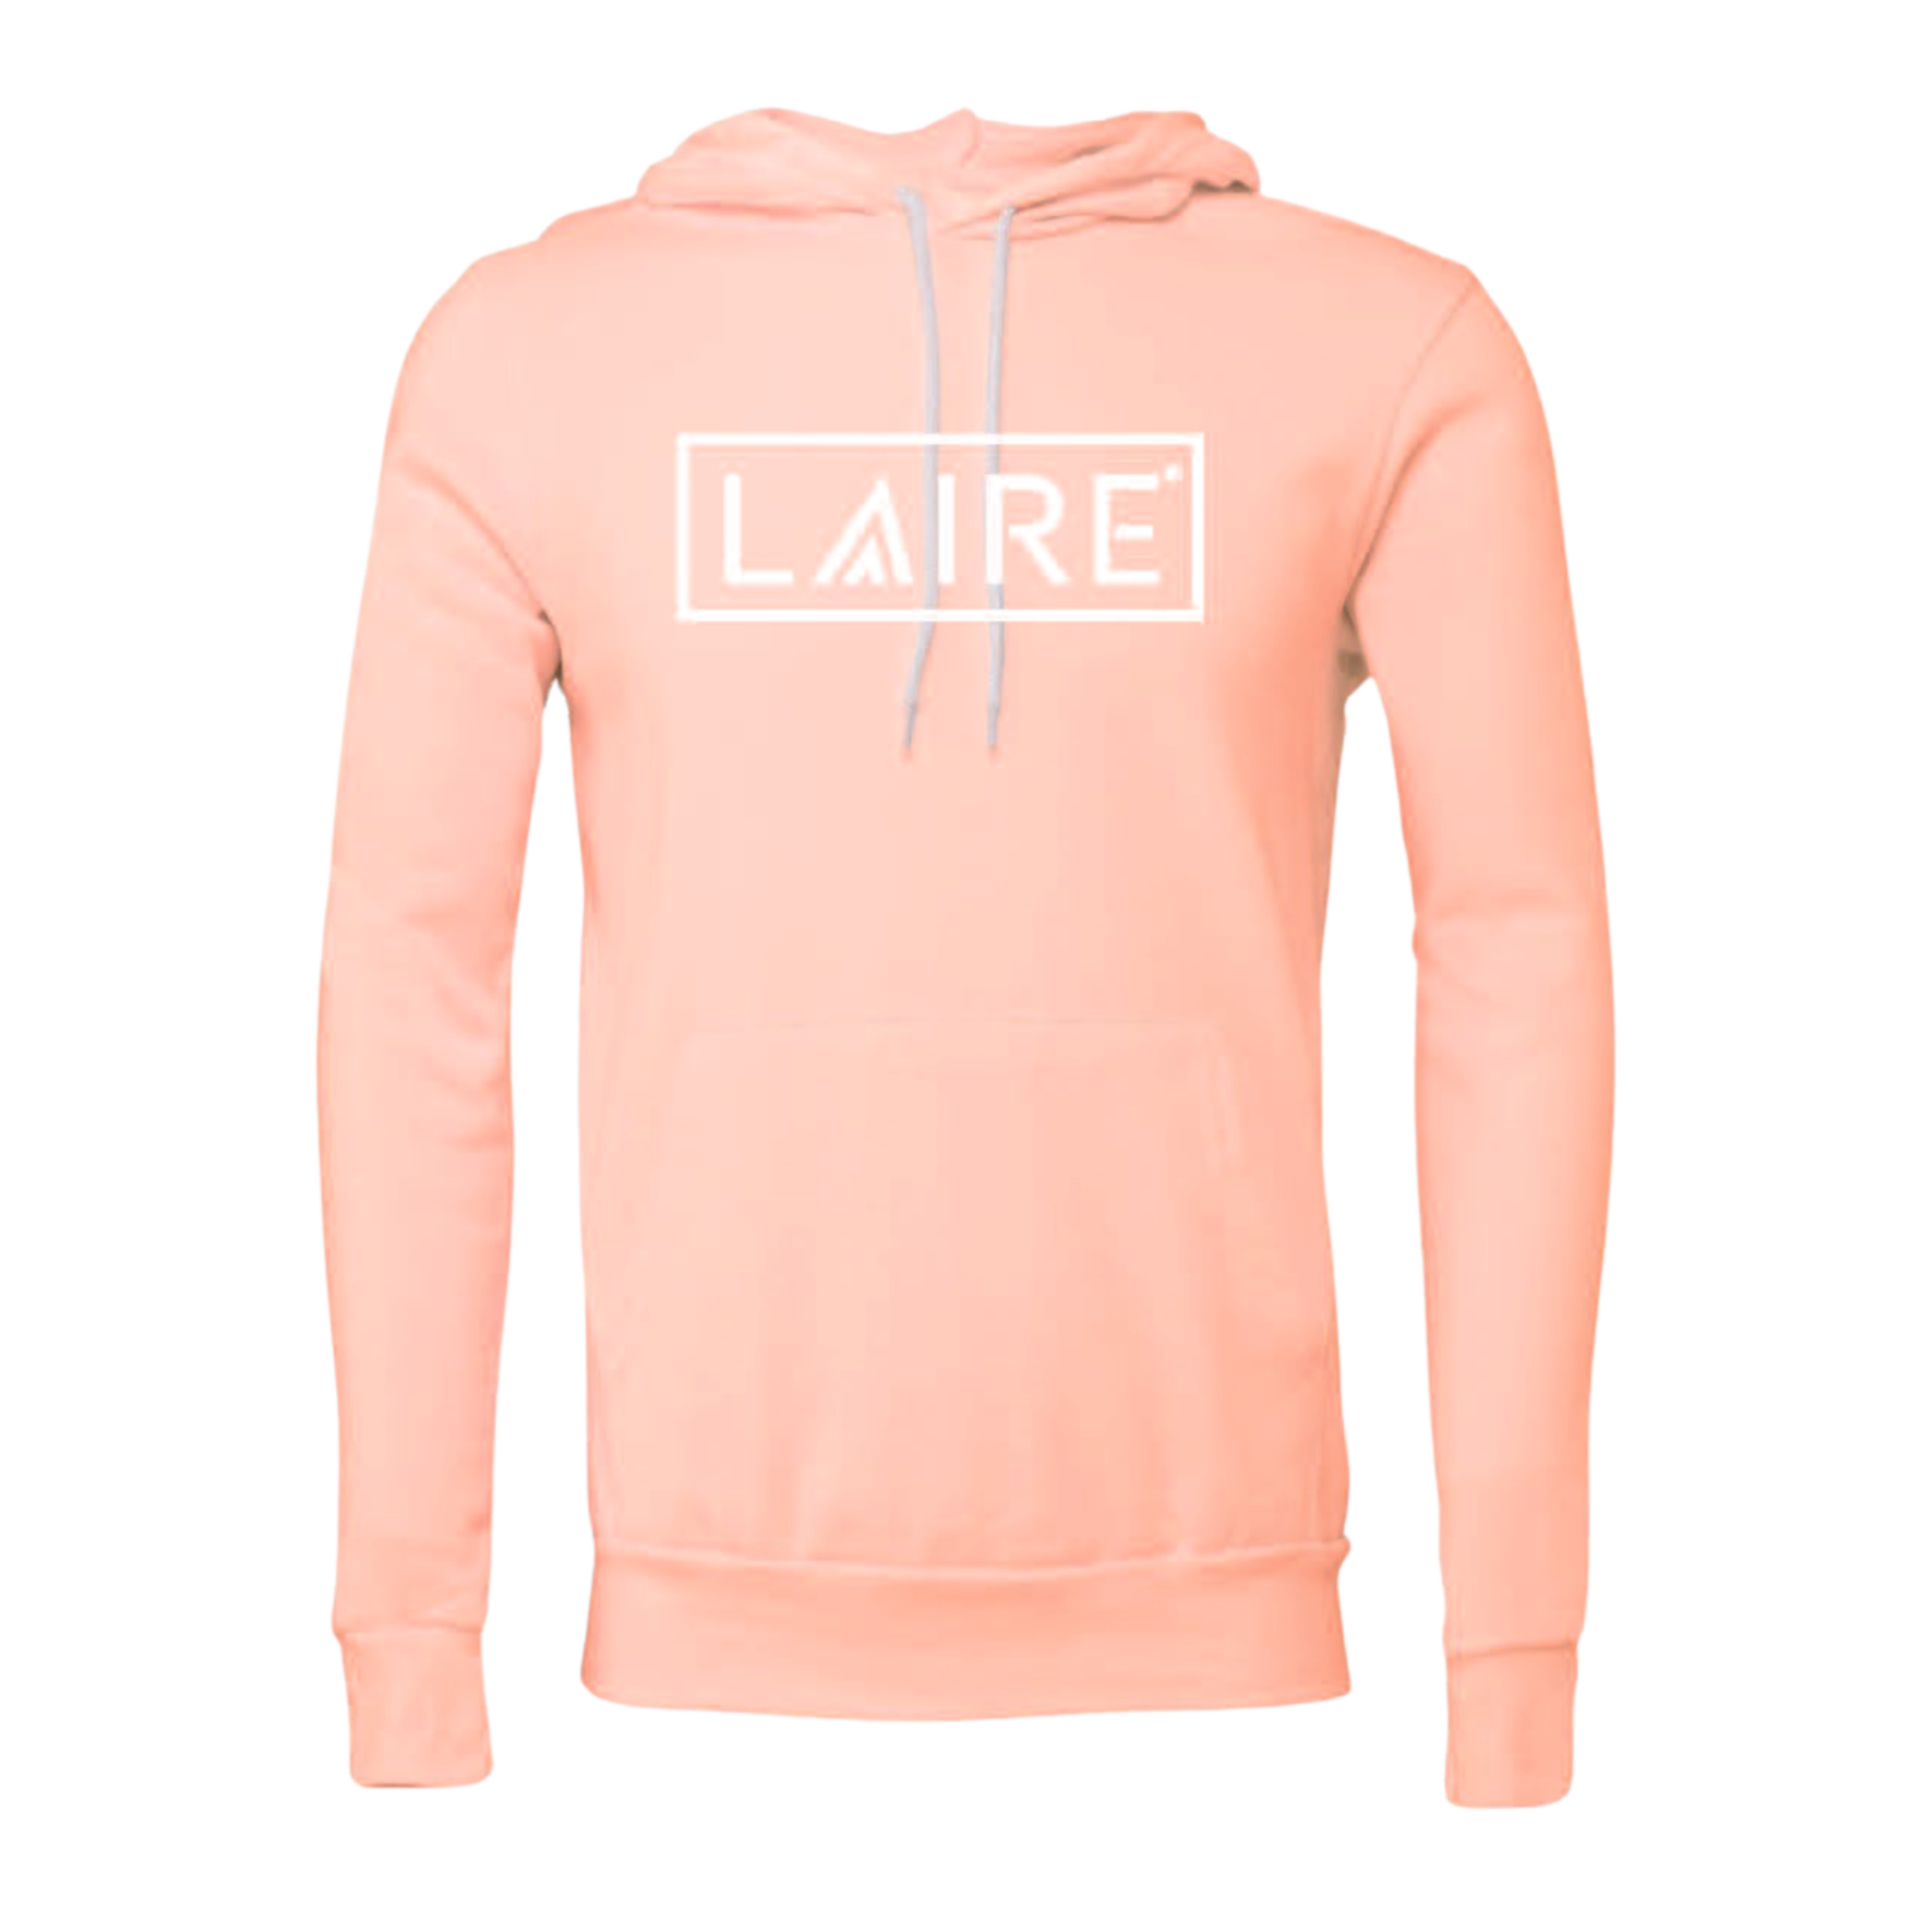 LAIRE Peach Hoodie